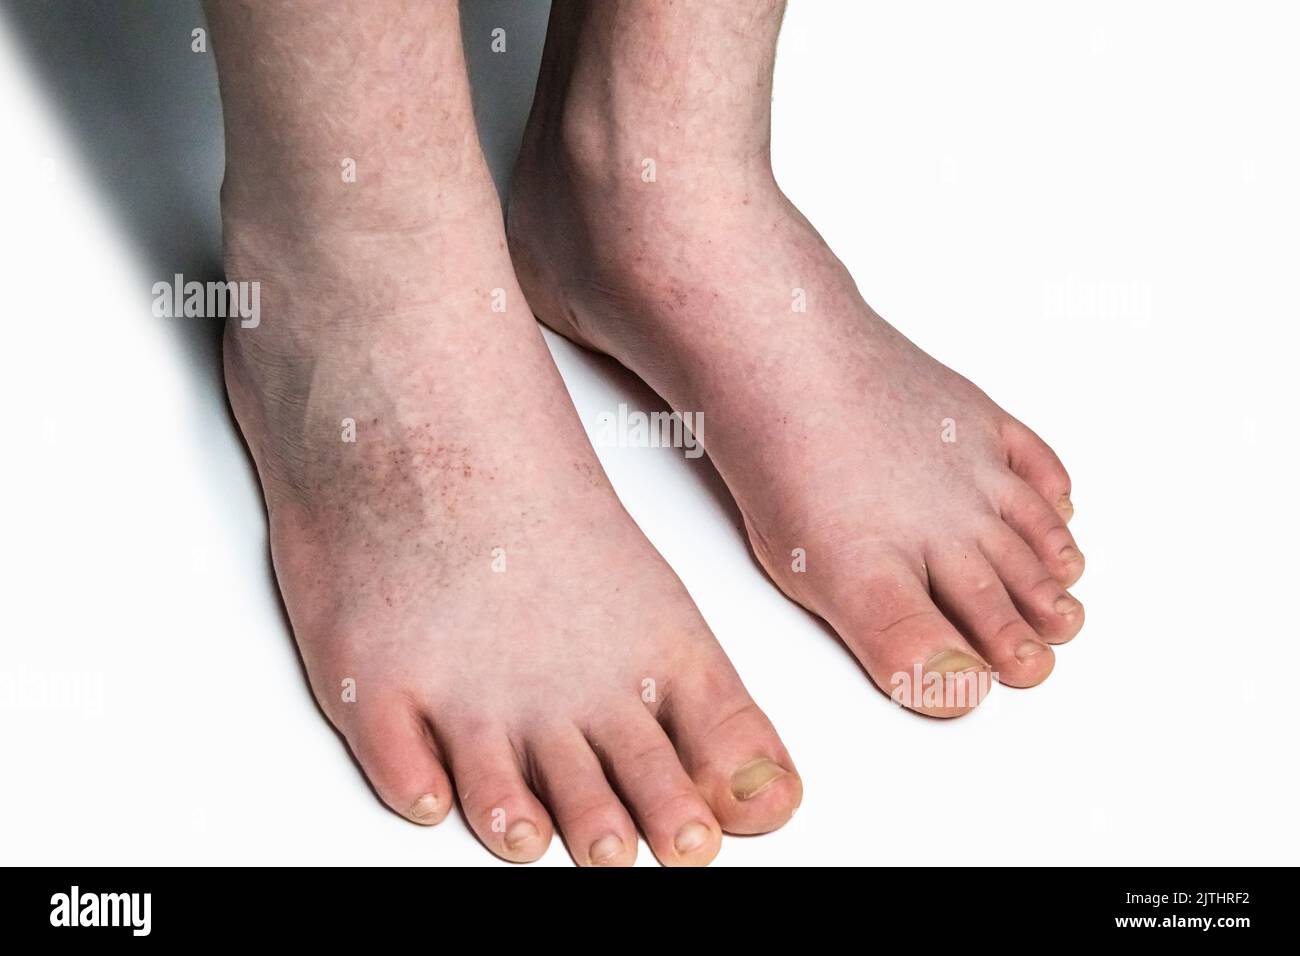 Skin with allergy,  food allergy, dermatitis, insect bites, irritation concept. A red rash on the feet of a male against  white background. Stock Photo